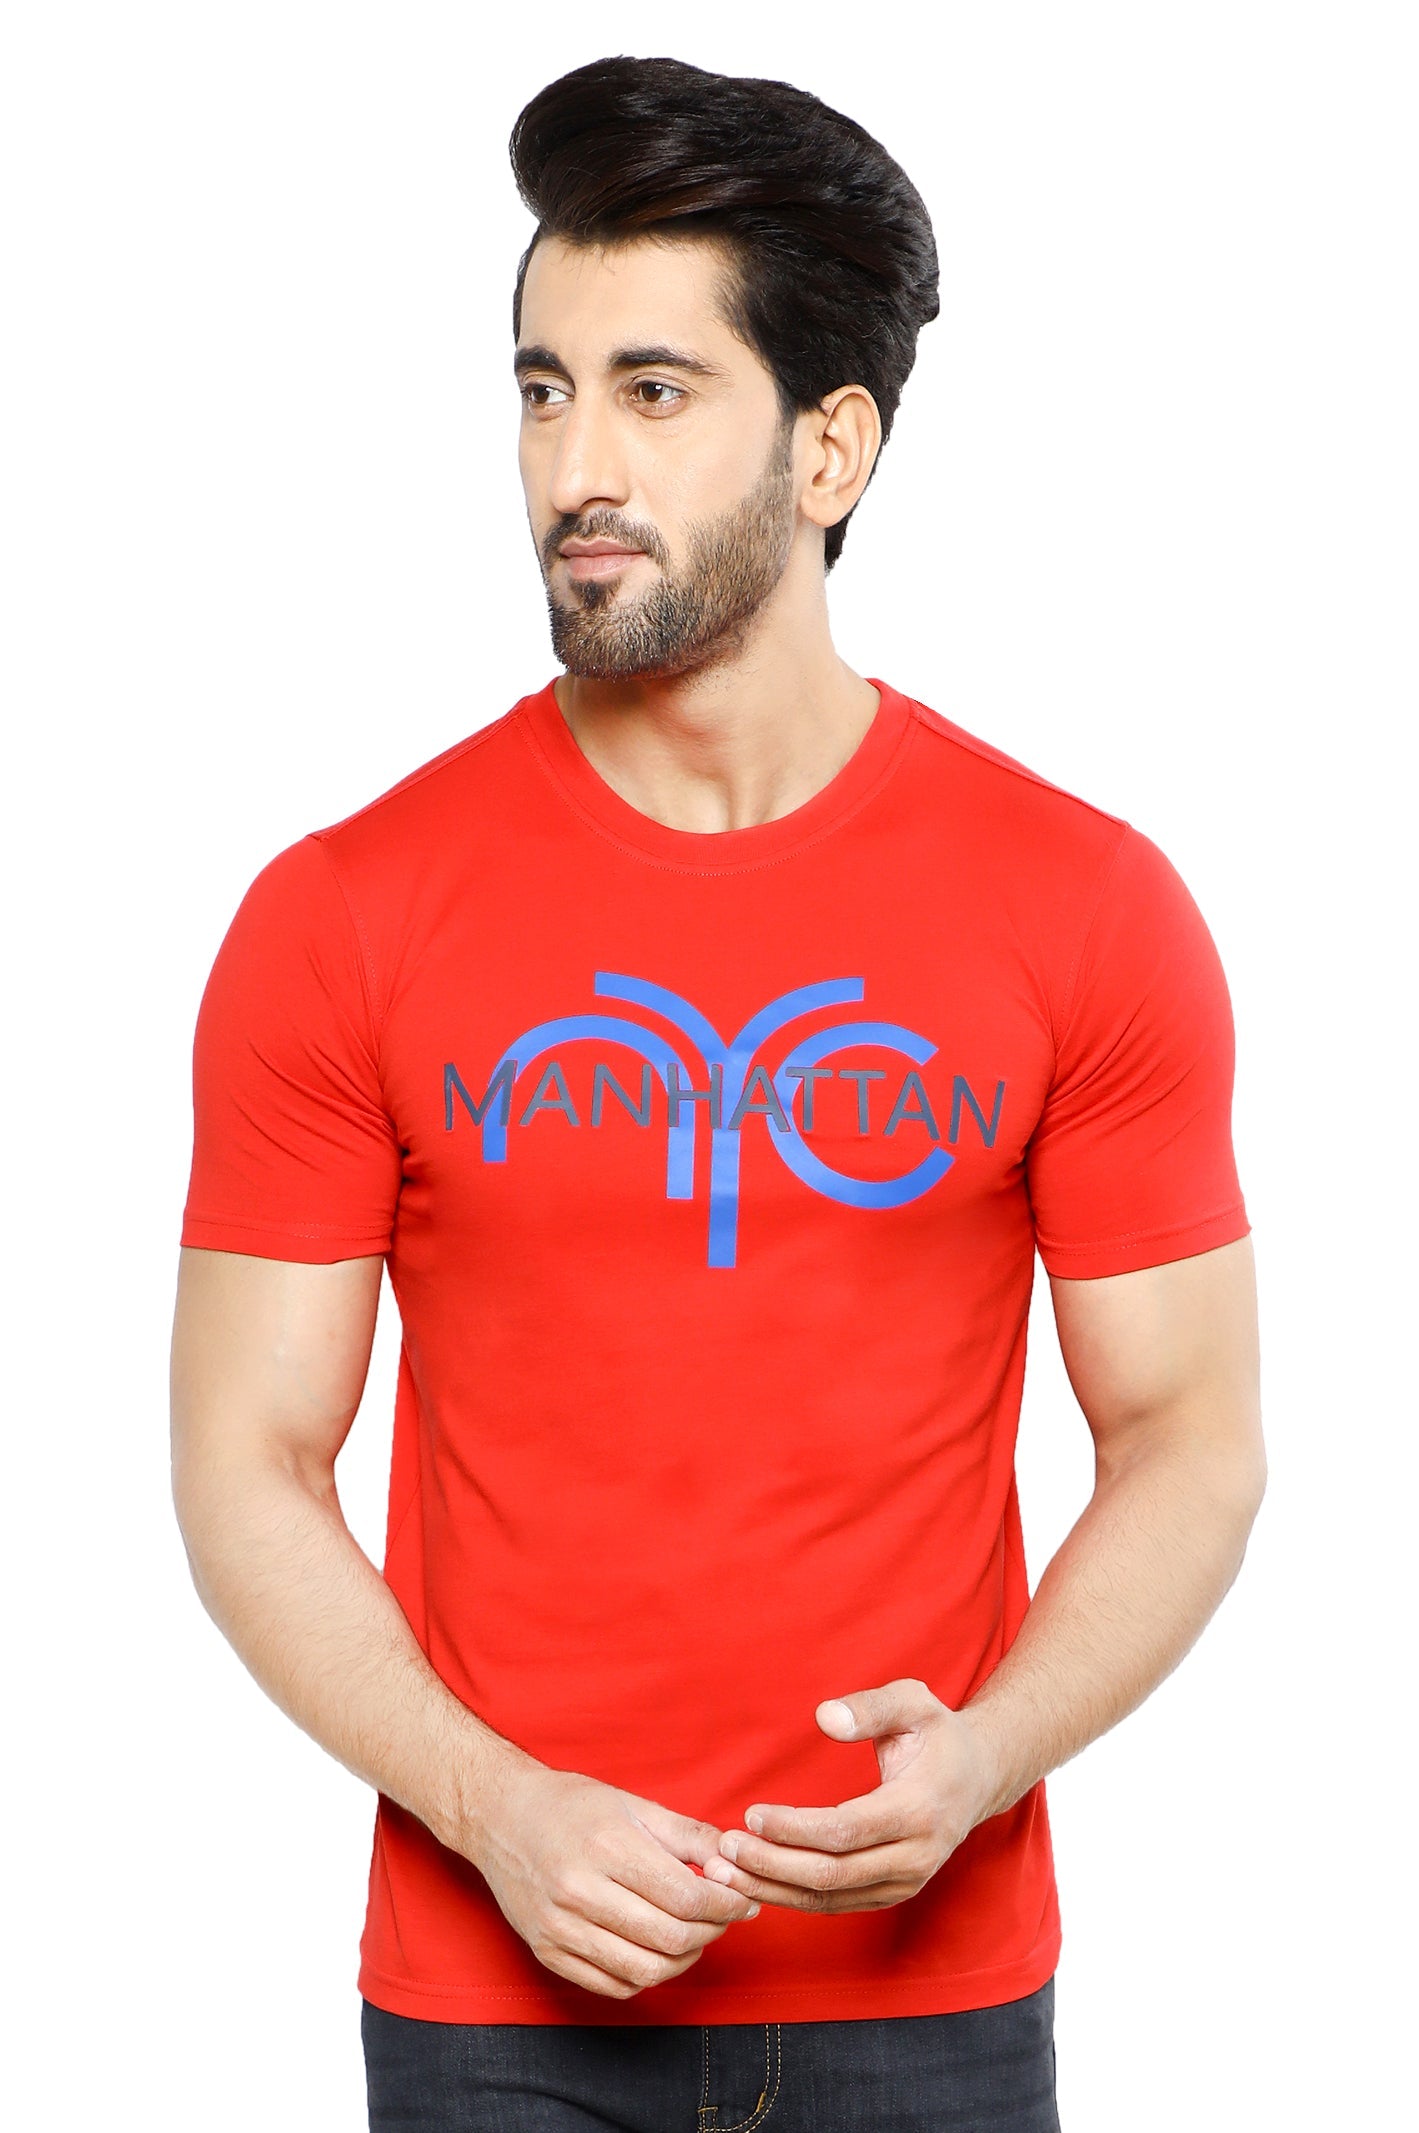 Diners Men's Round Neck T-Shirt SKU: NA803-RED - Diners